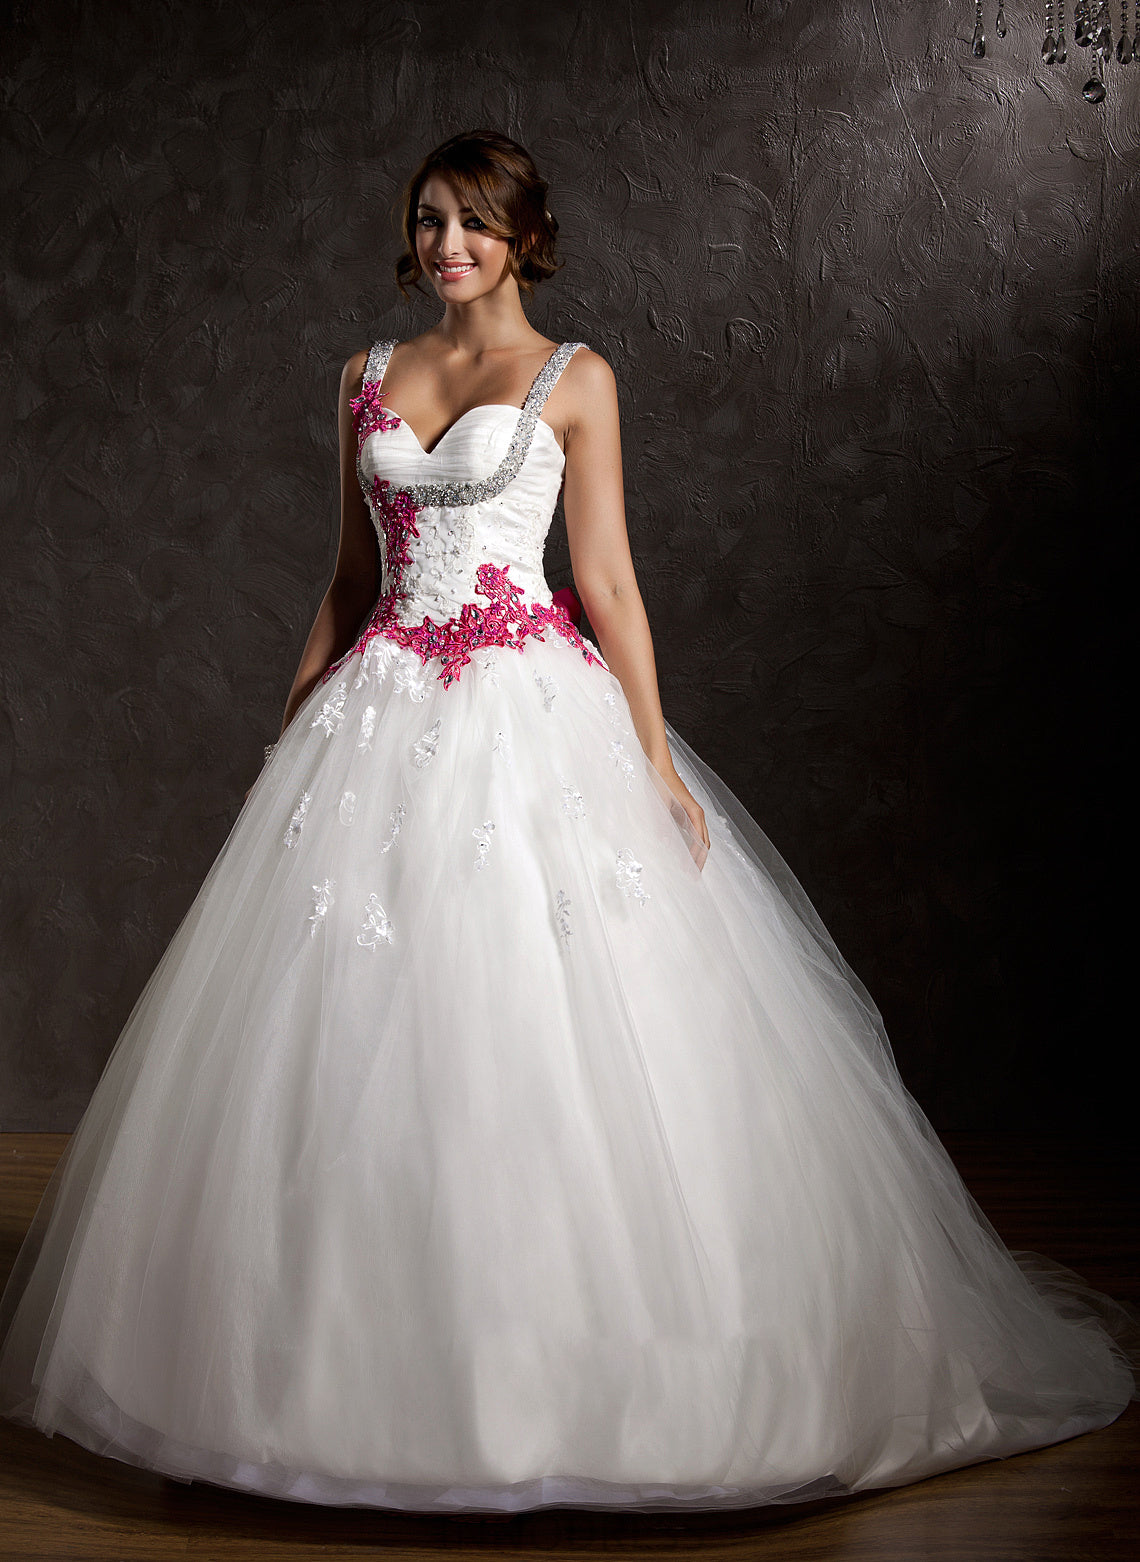 Tulle Lace Bow(s) Wedding Kristen Appliques With Train Ball-Gown/Princess Wedding Dresses Ruffle Chapel Dress Sweetheart